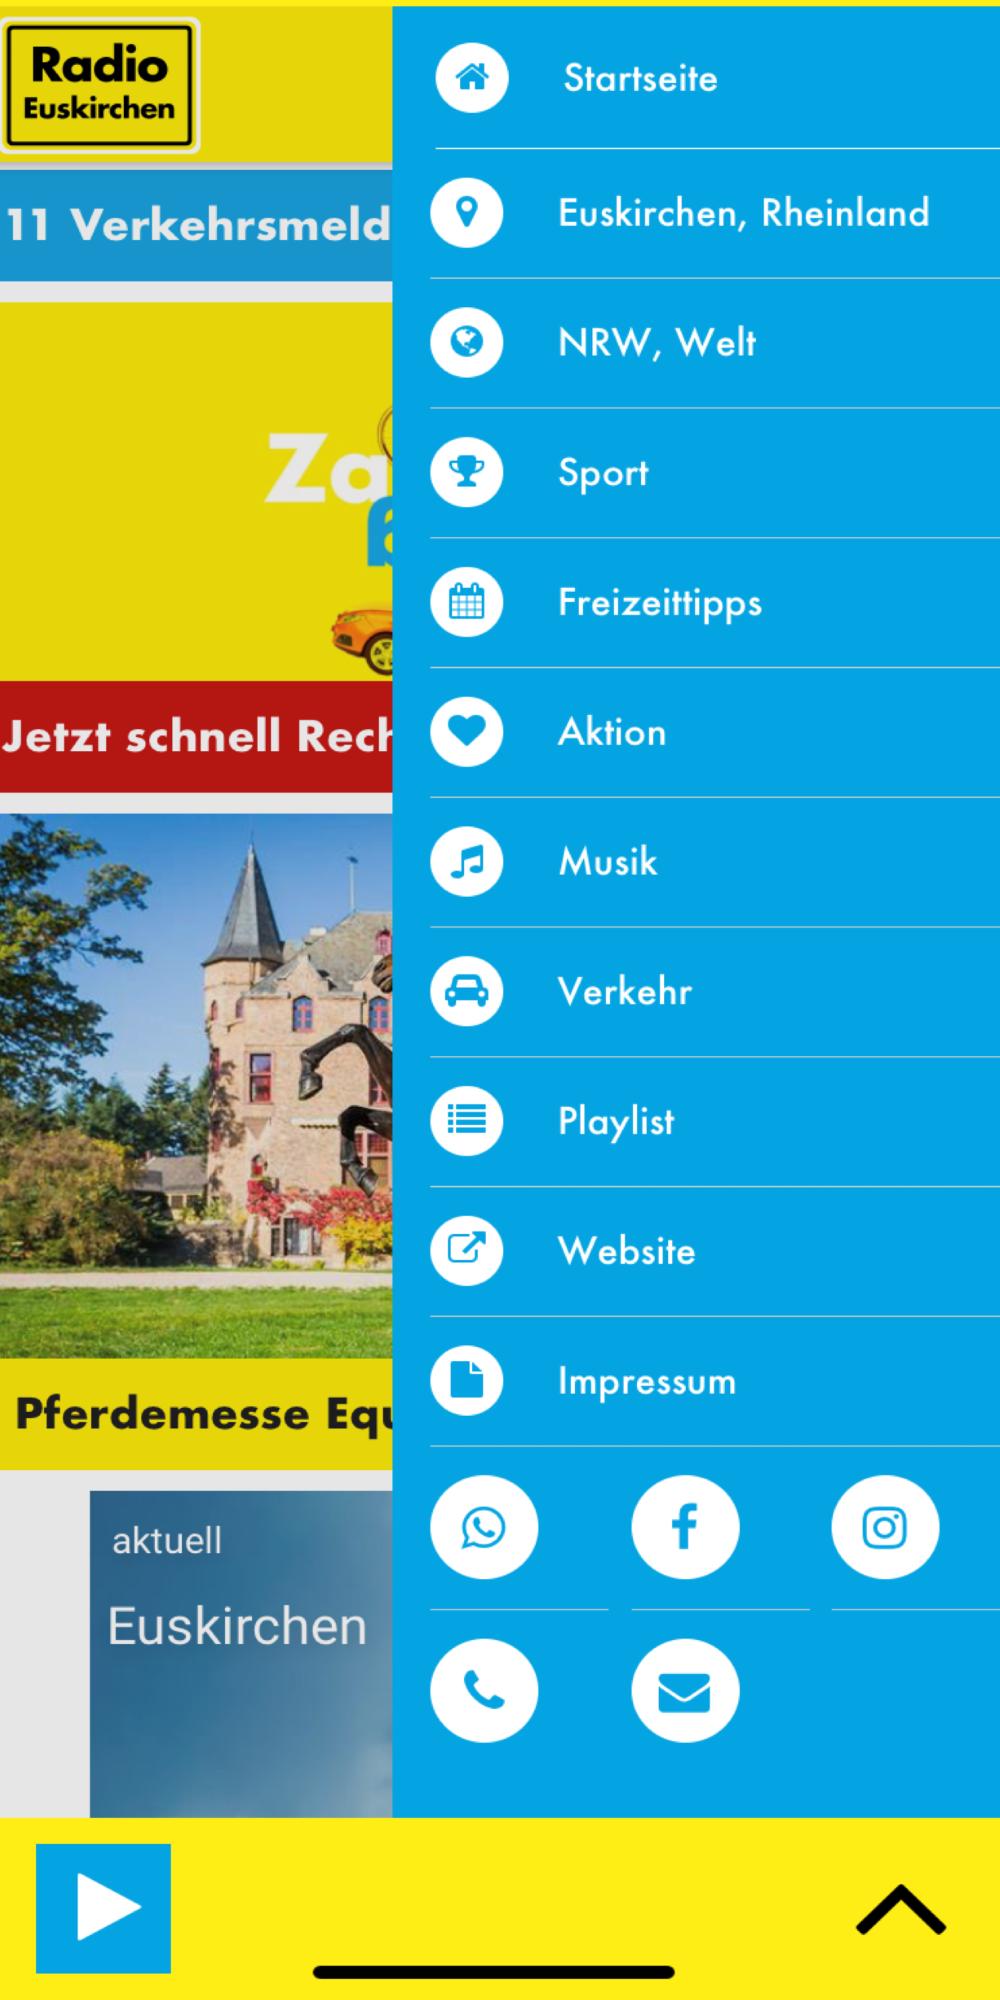 Radio Euskirchen for Android - APK Download